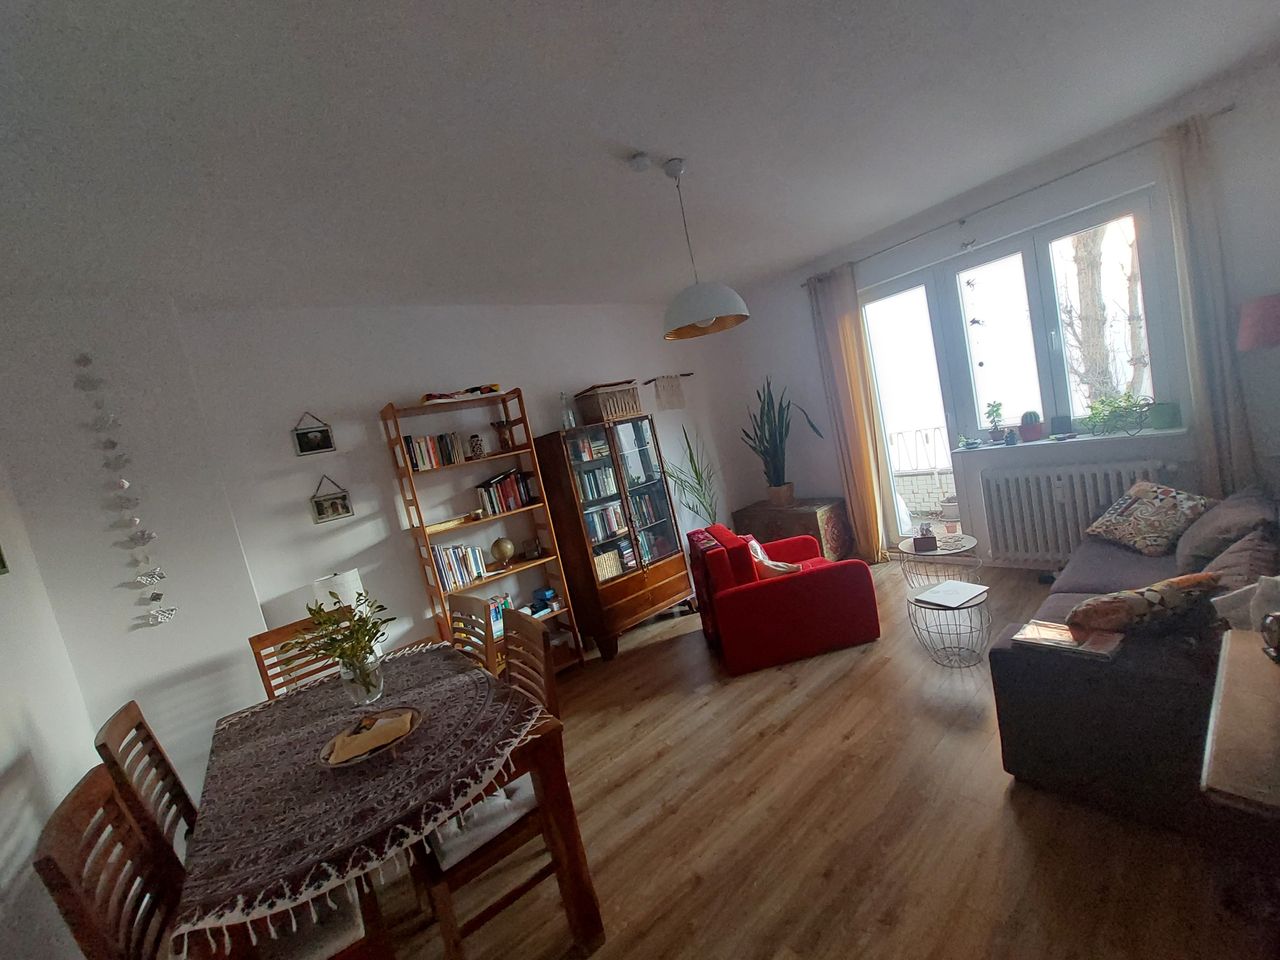 Lovely and cozy apartment in Moabit